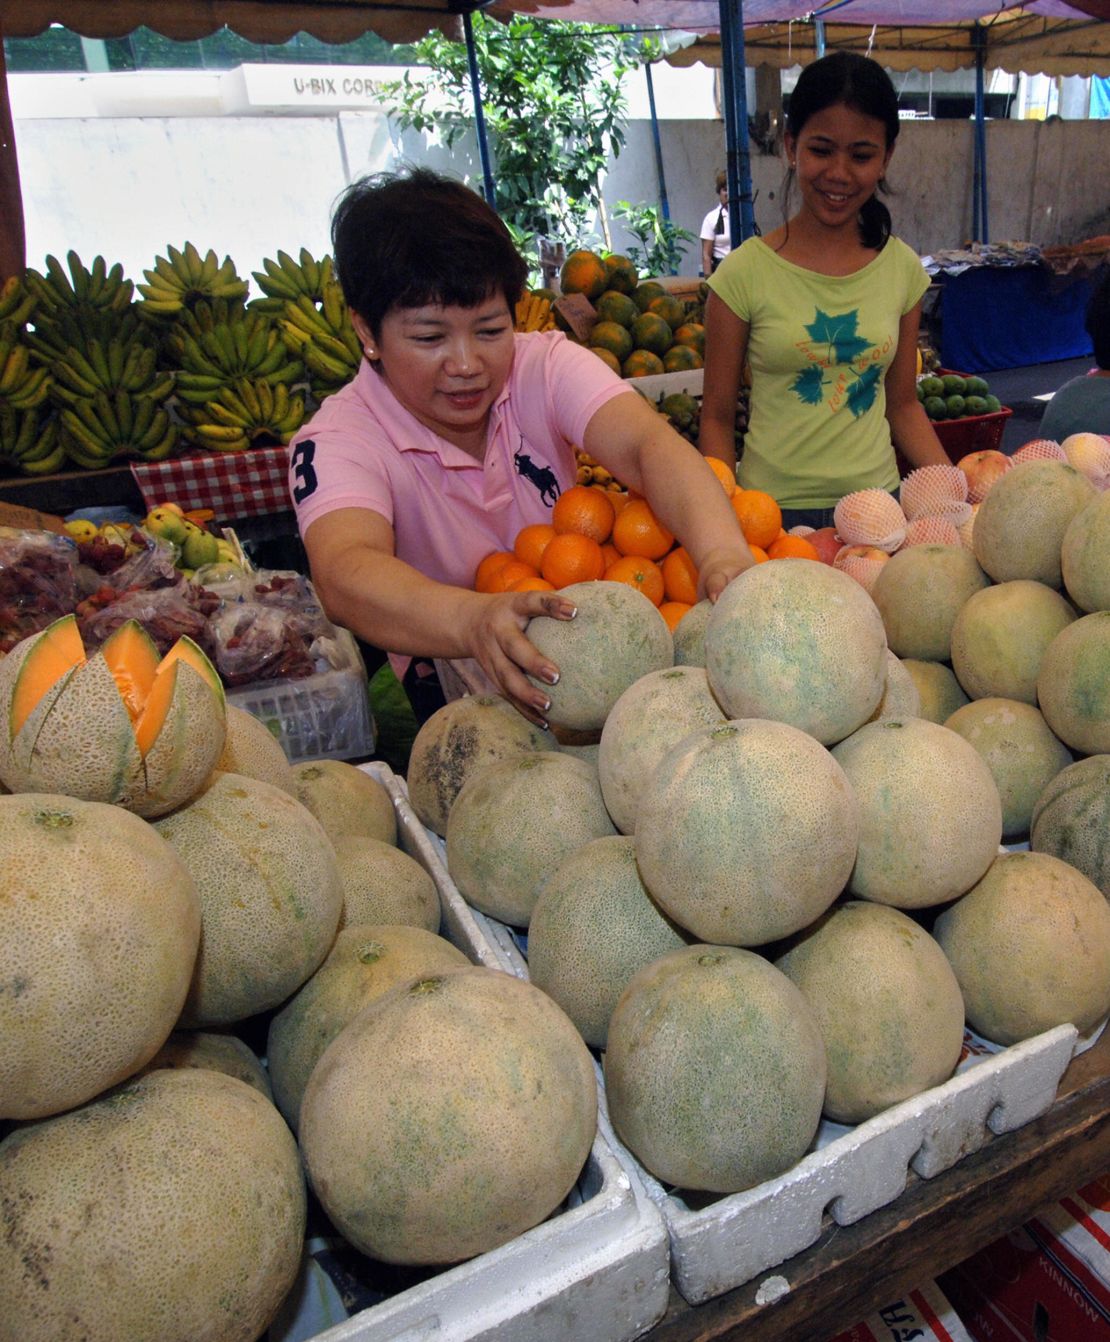 Cantaloupes were considered the cause of the outbreak. 